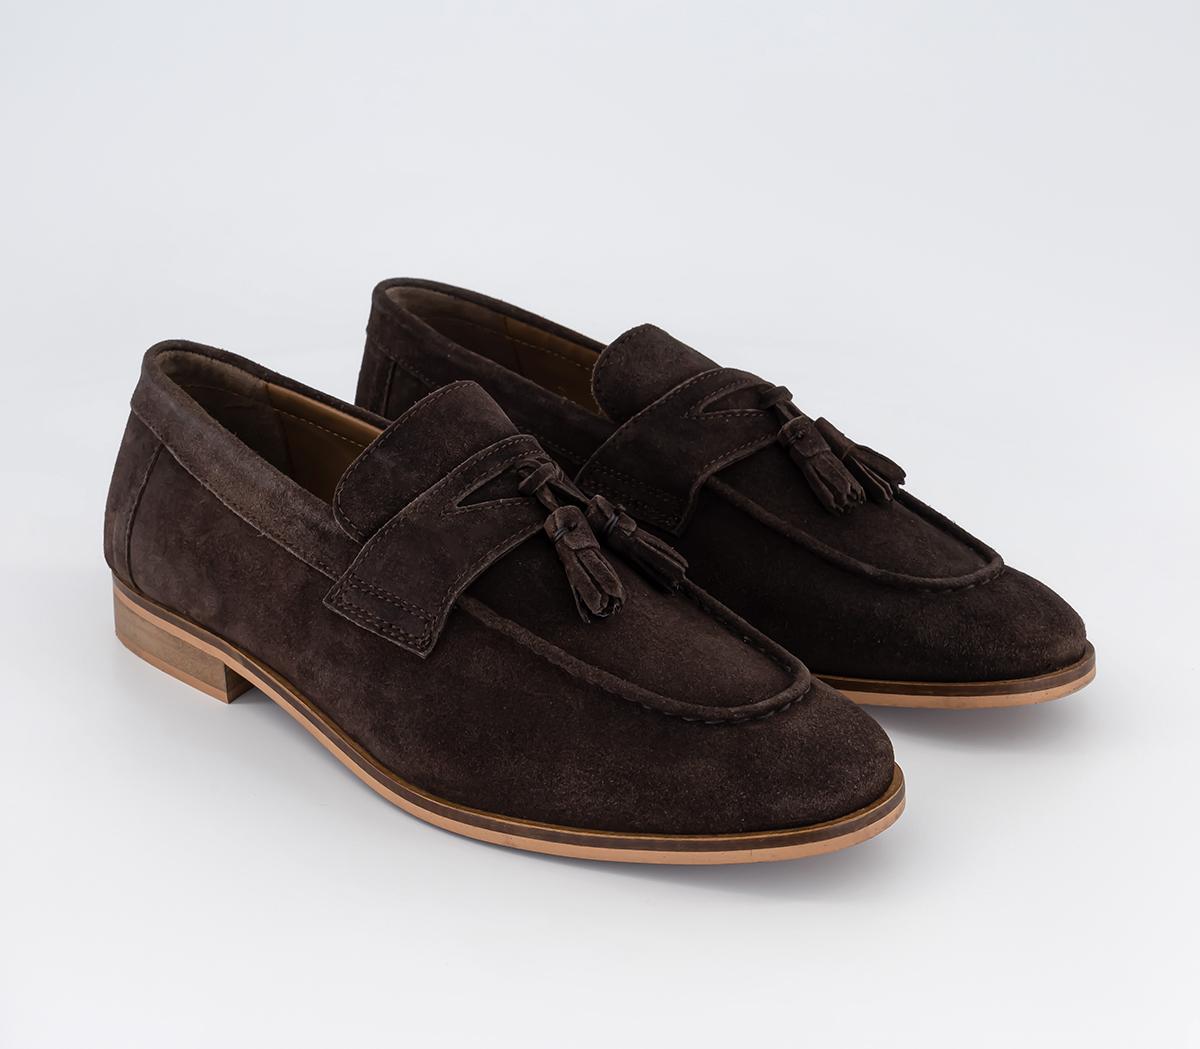 OFFICE Mens Wide Fit Channing Tassle Loafers Brown Suede, 8